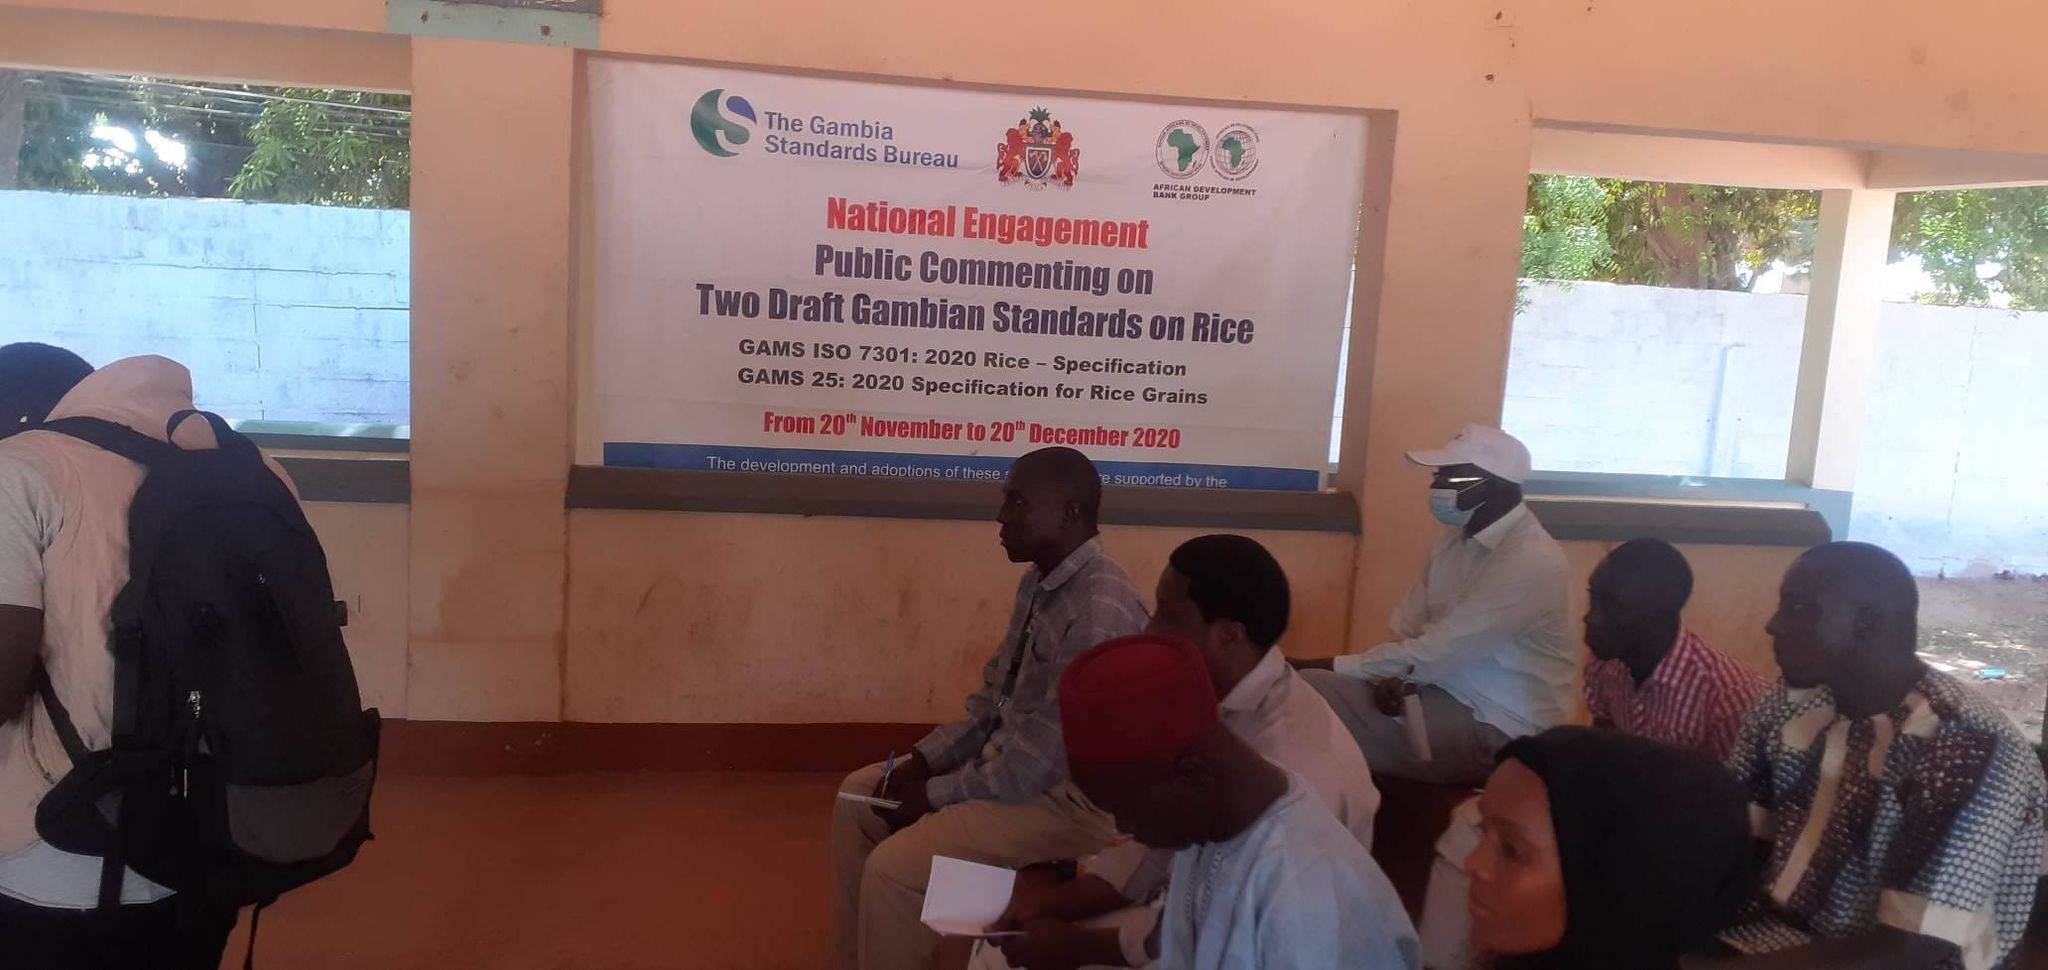 Two draft Gambian standards on rice forum held